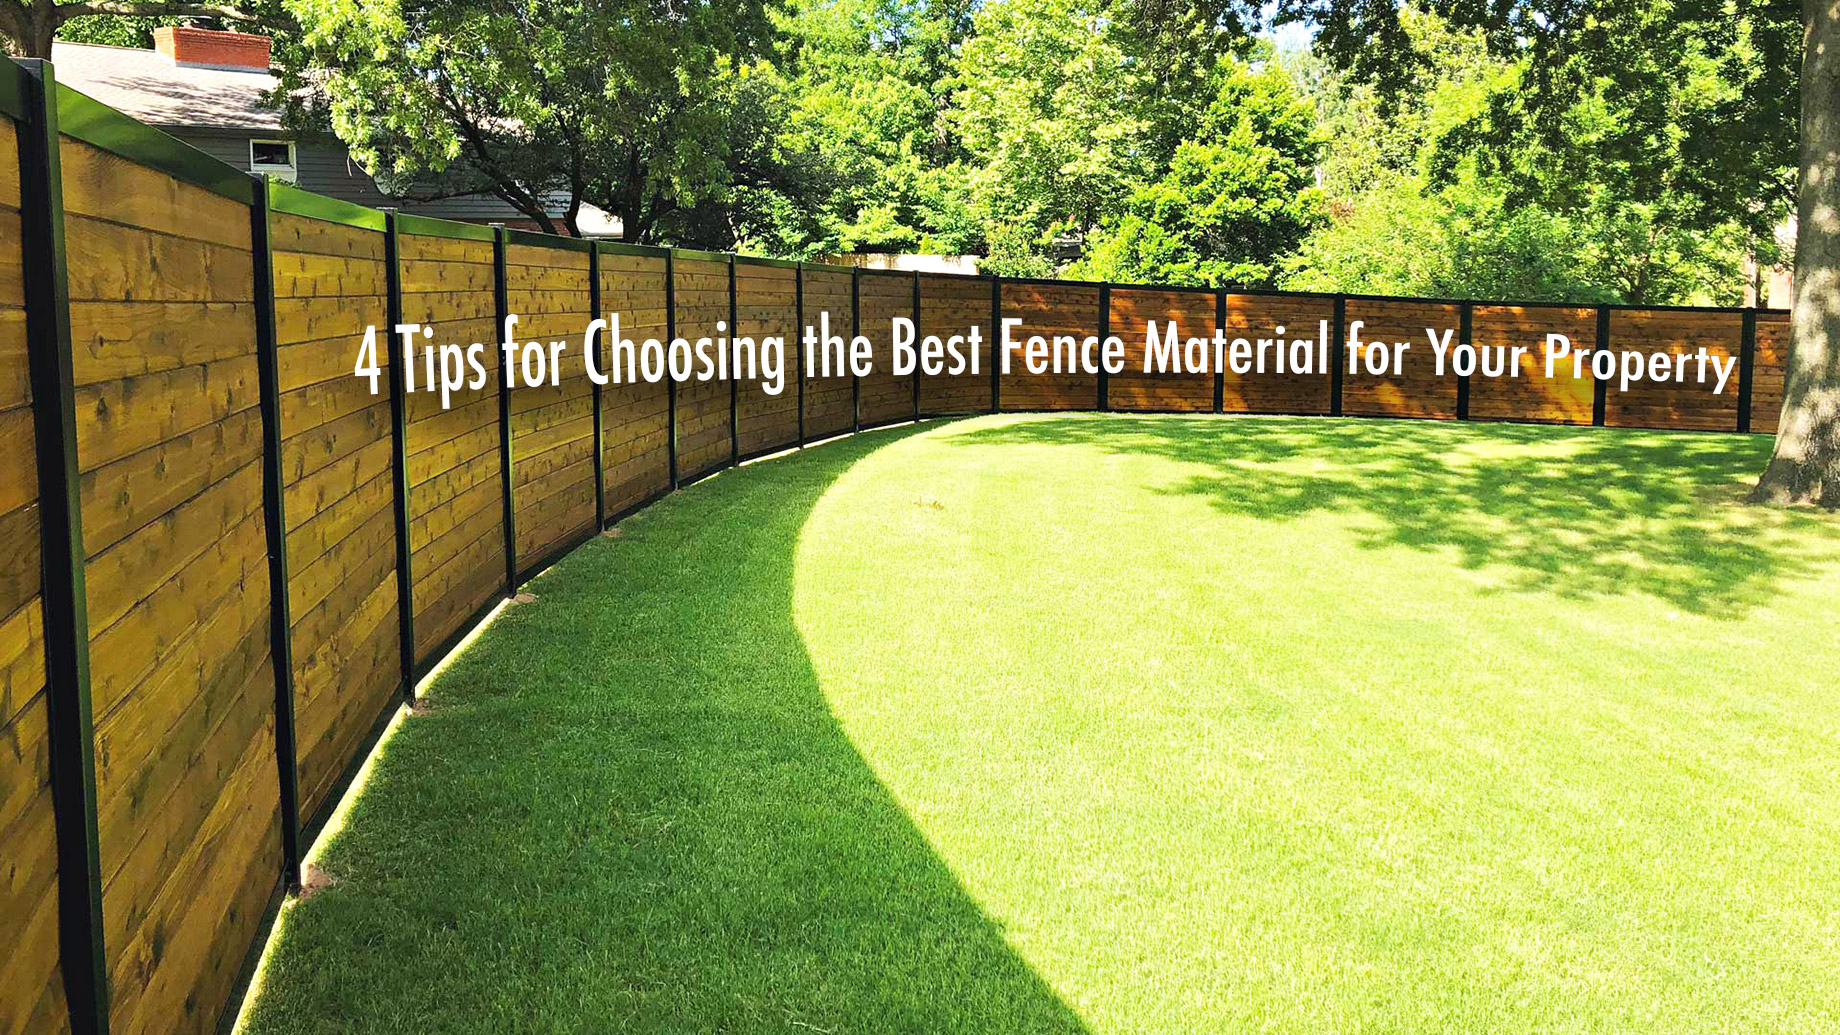 4 Tips for Choosing the Best Fence Material for Your Property